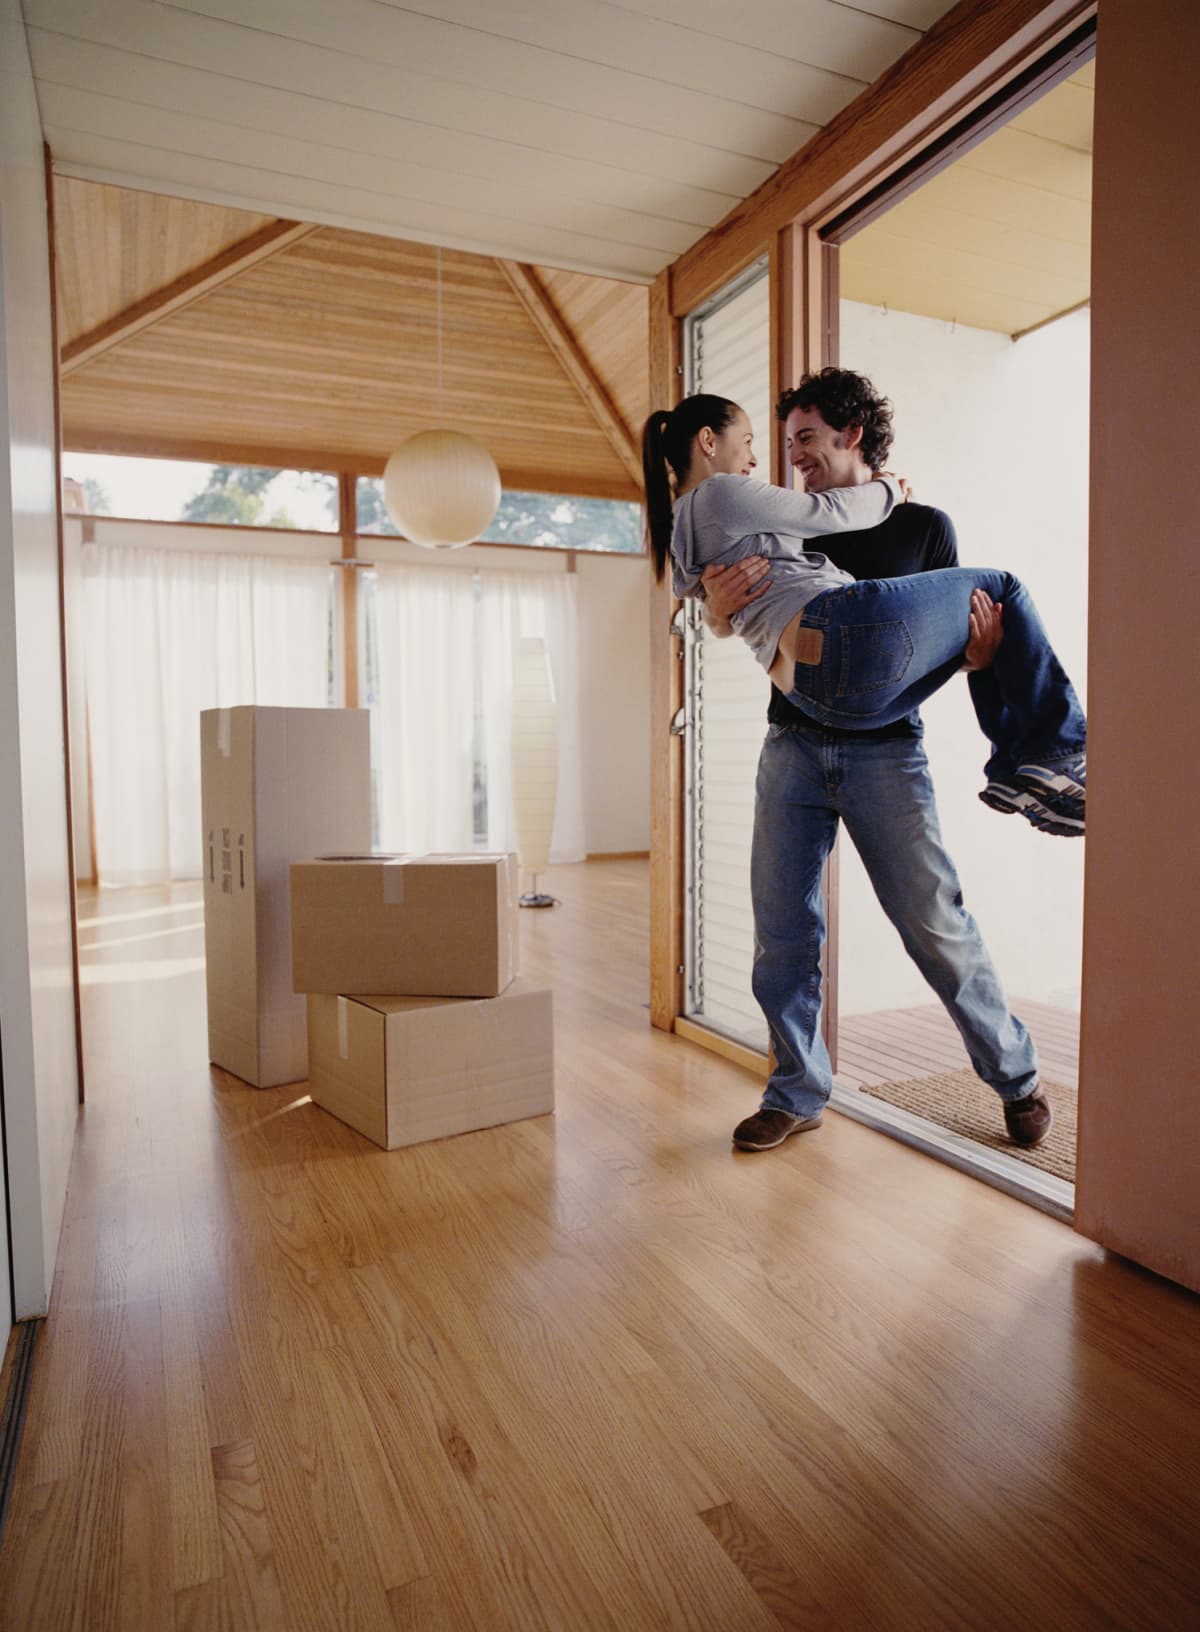 A man carries his girlfriend over the threshold as they move in together